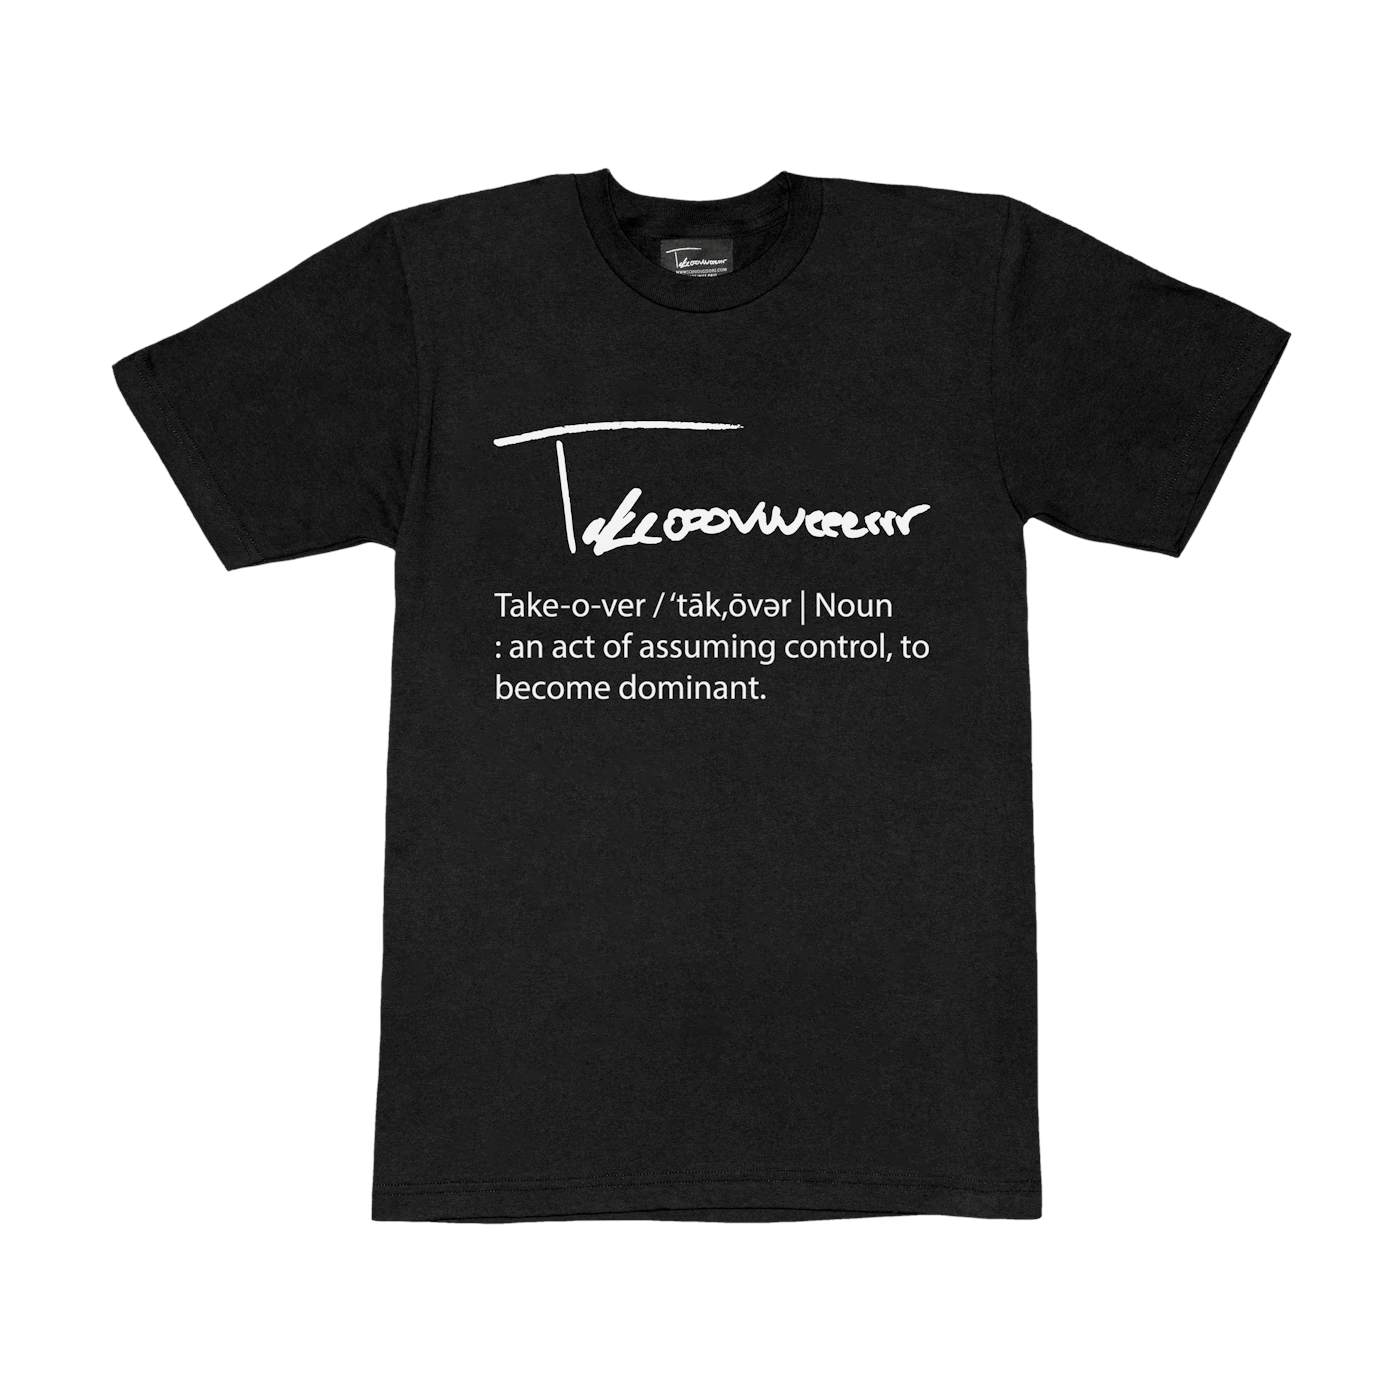 Taylor J Takeover Definition Tee (Black/White)